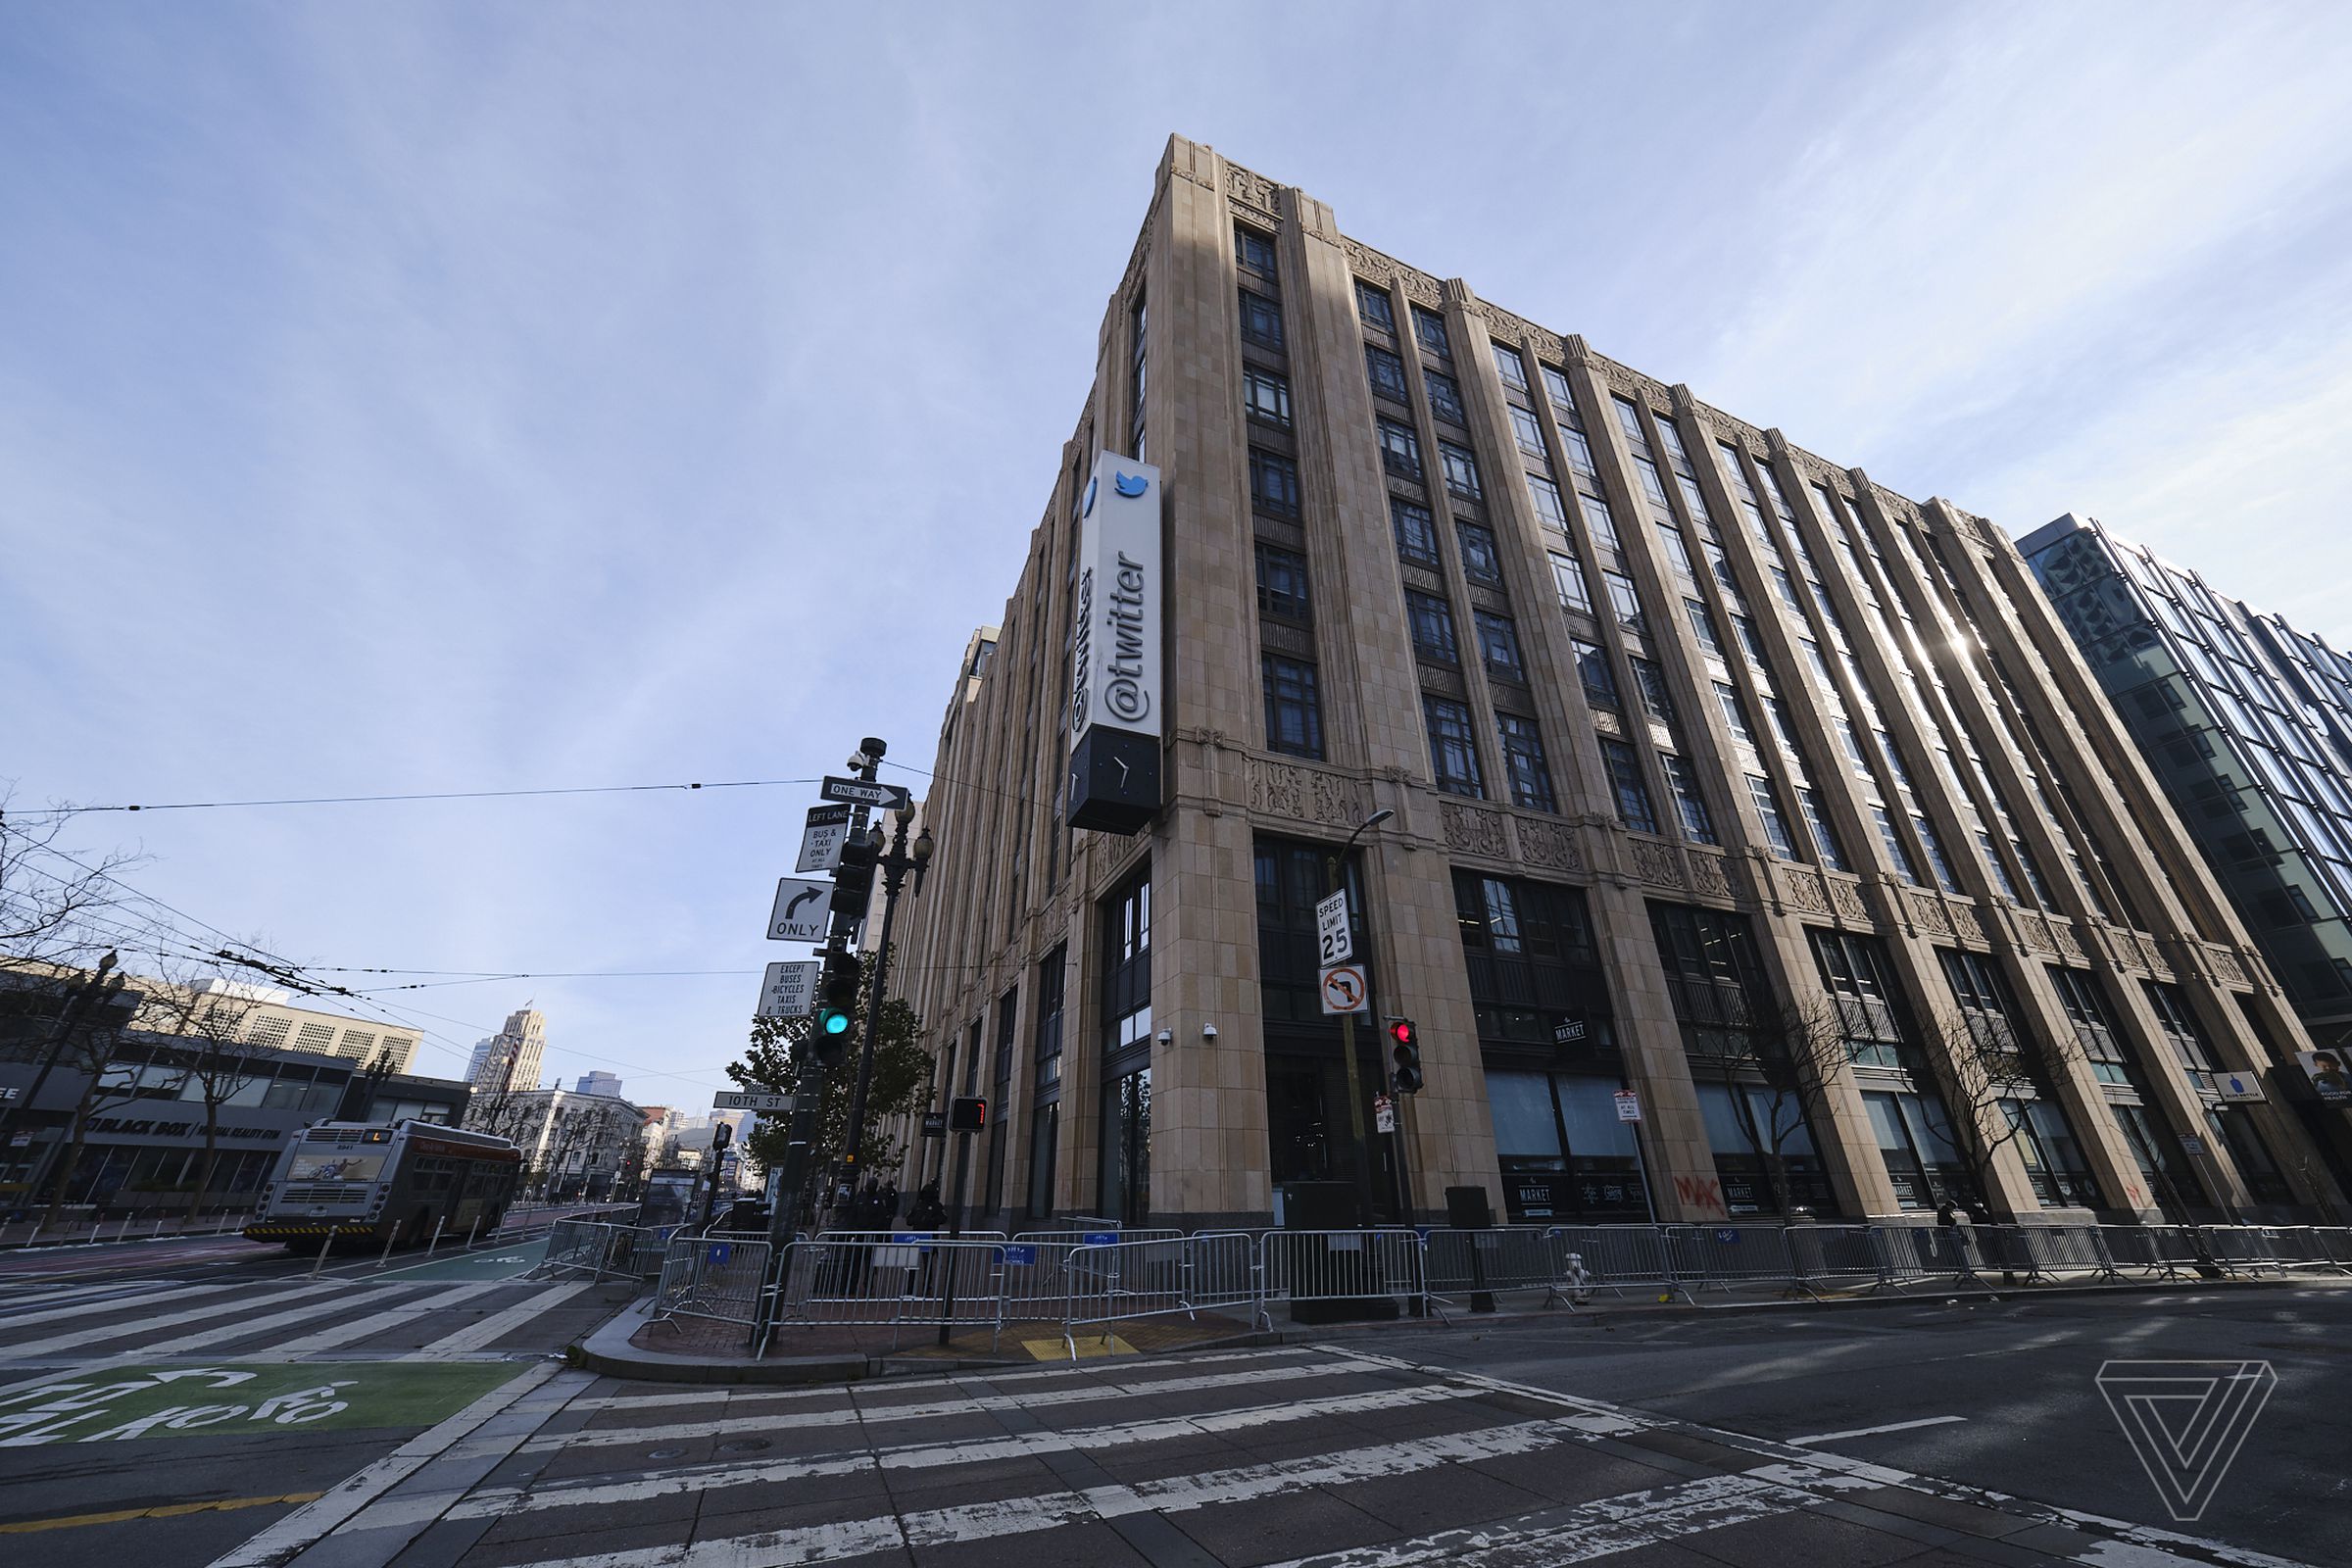 Twitter’s headquarters on Market St. in San Francisco was barricaded with fences.